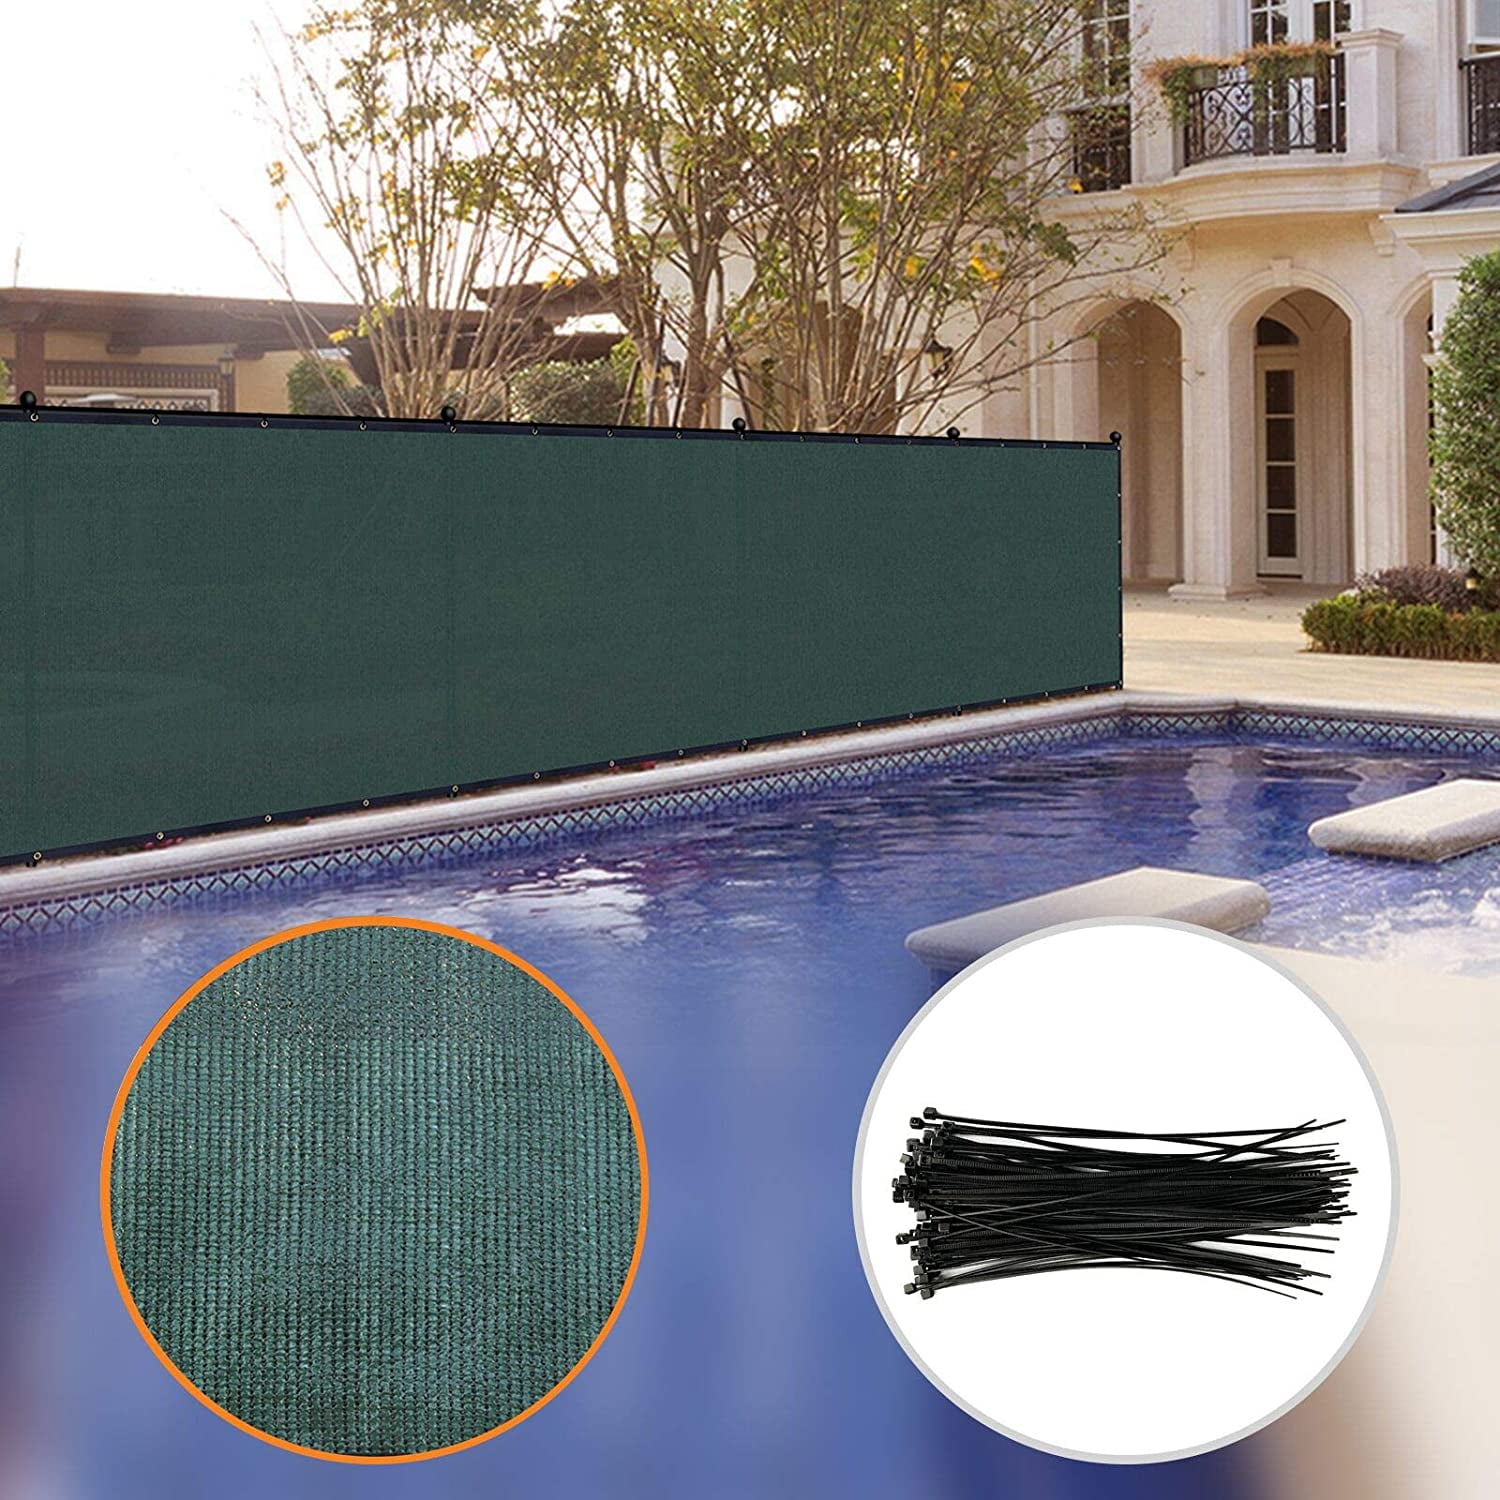 Ifenceview 6'x15' Green Fence Privacy Screen Mesh for Construction Yard Garden 